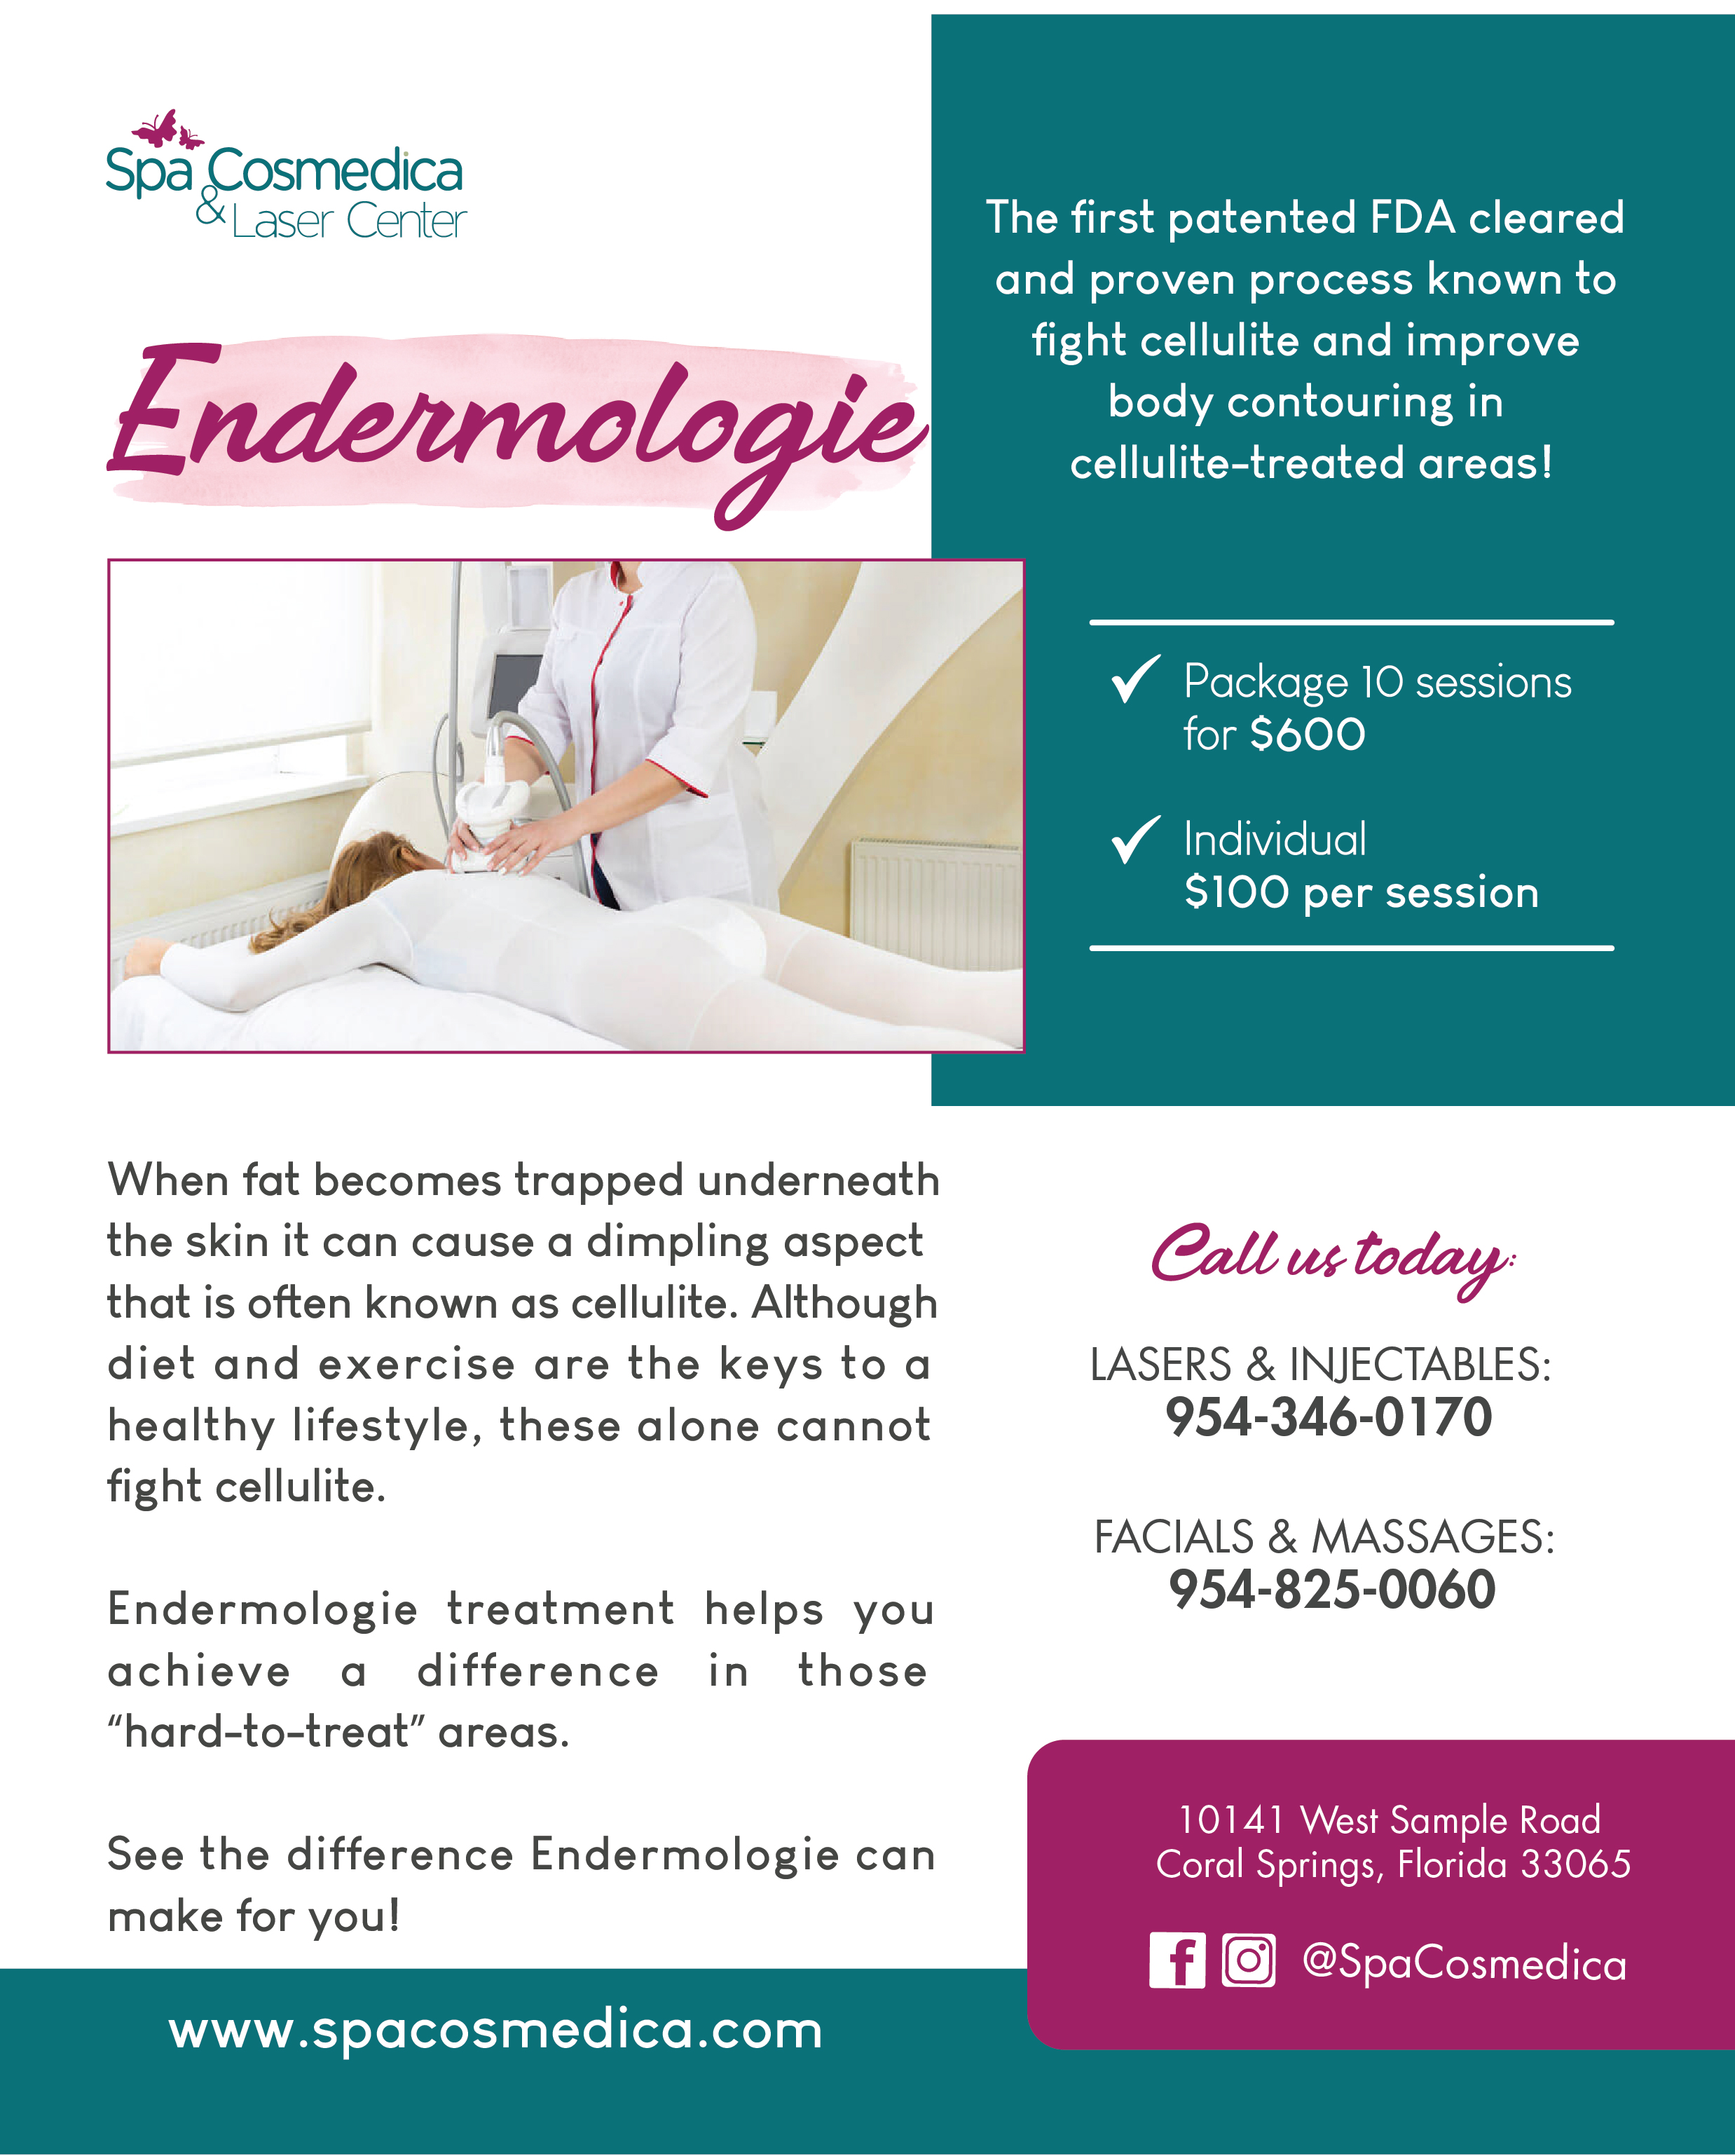 , Improve Body Contouring With Endermologie!